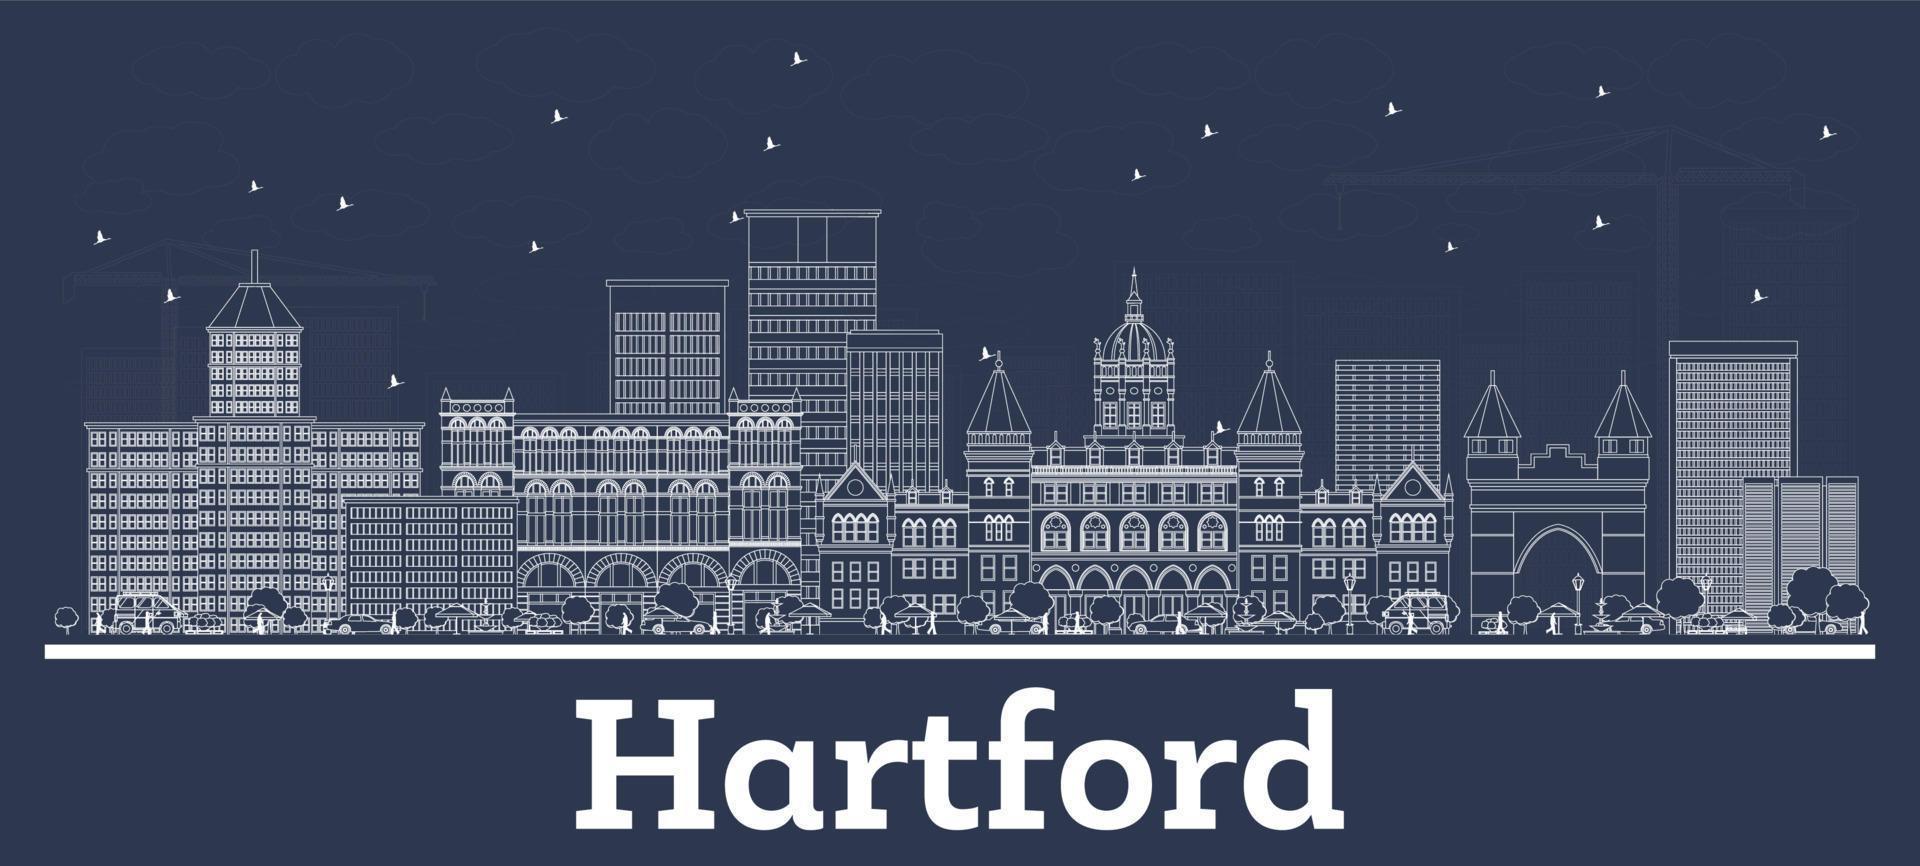 Outline Hartford Connecticut USA City Skyline with White Buildings. vector